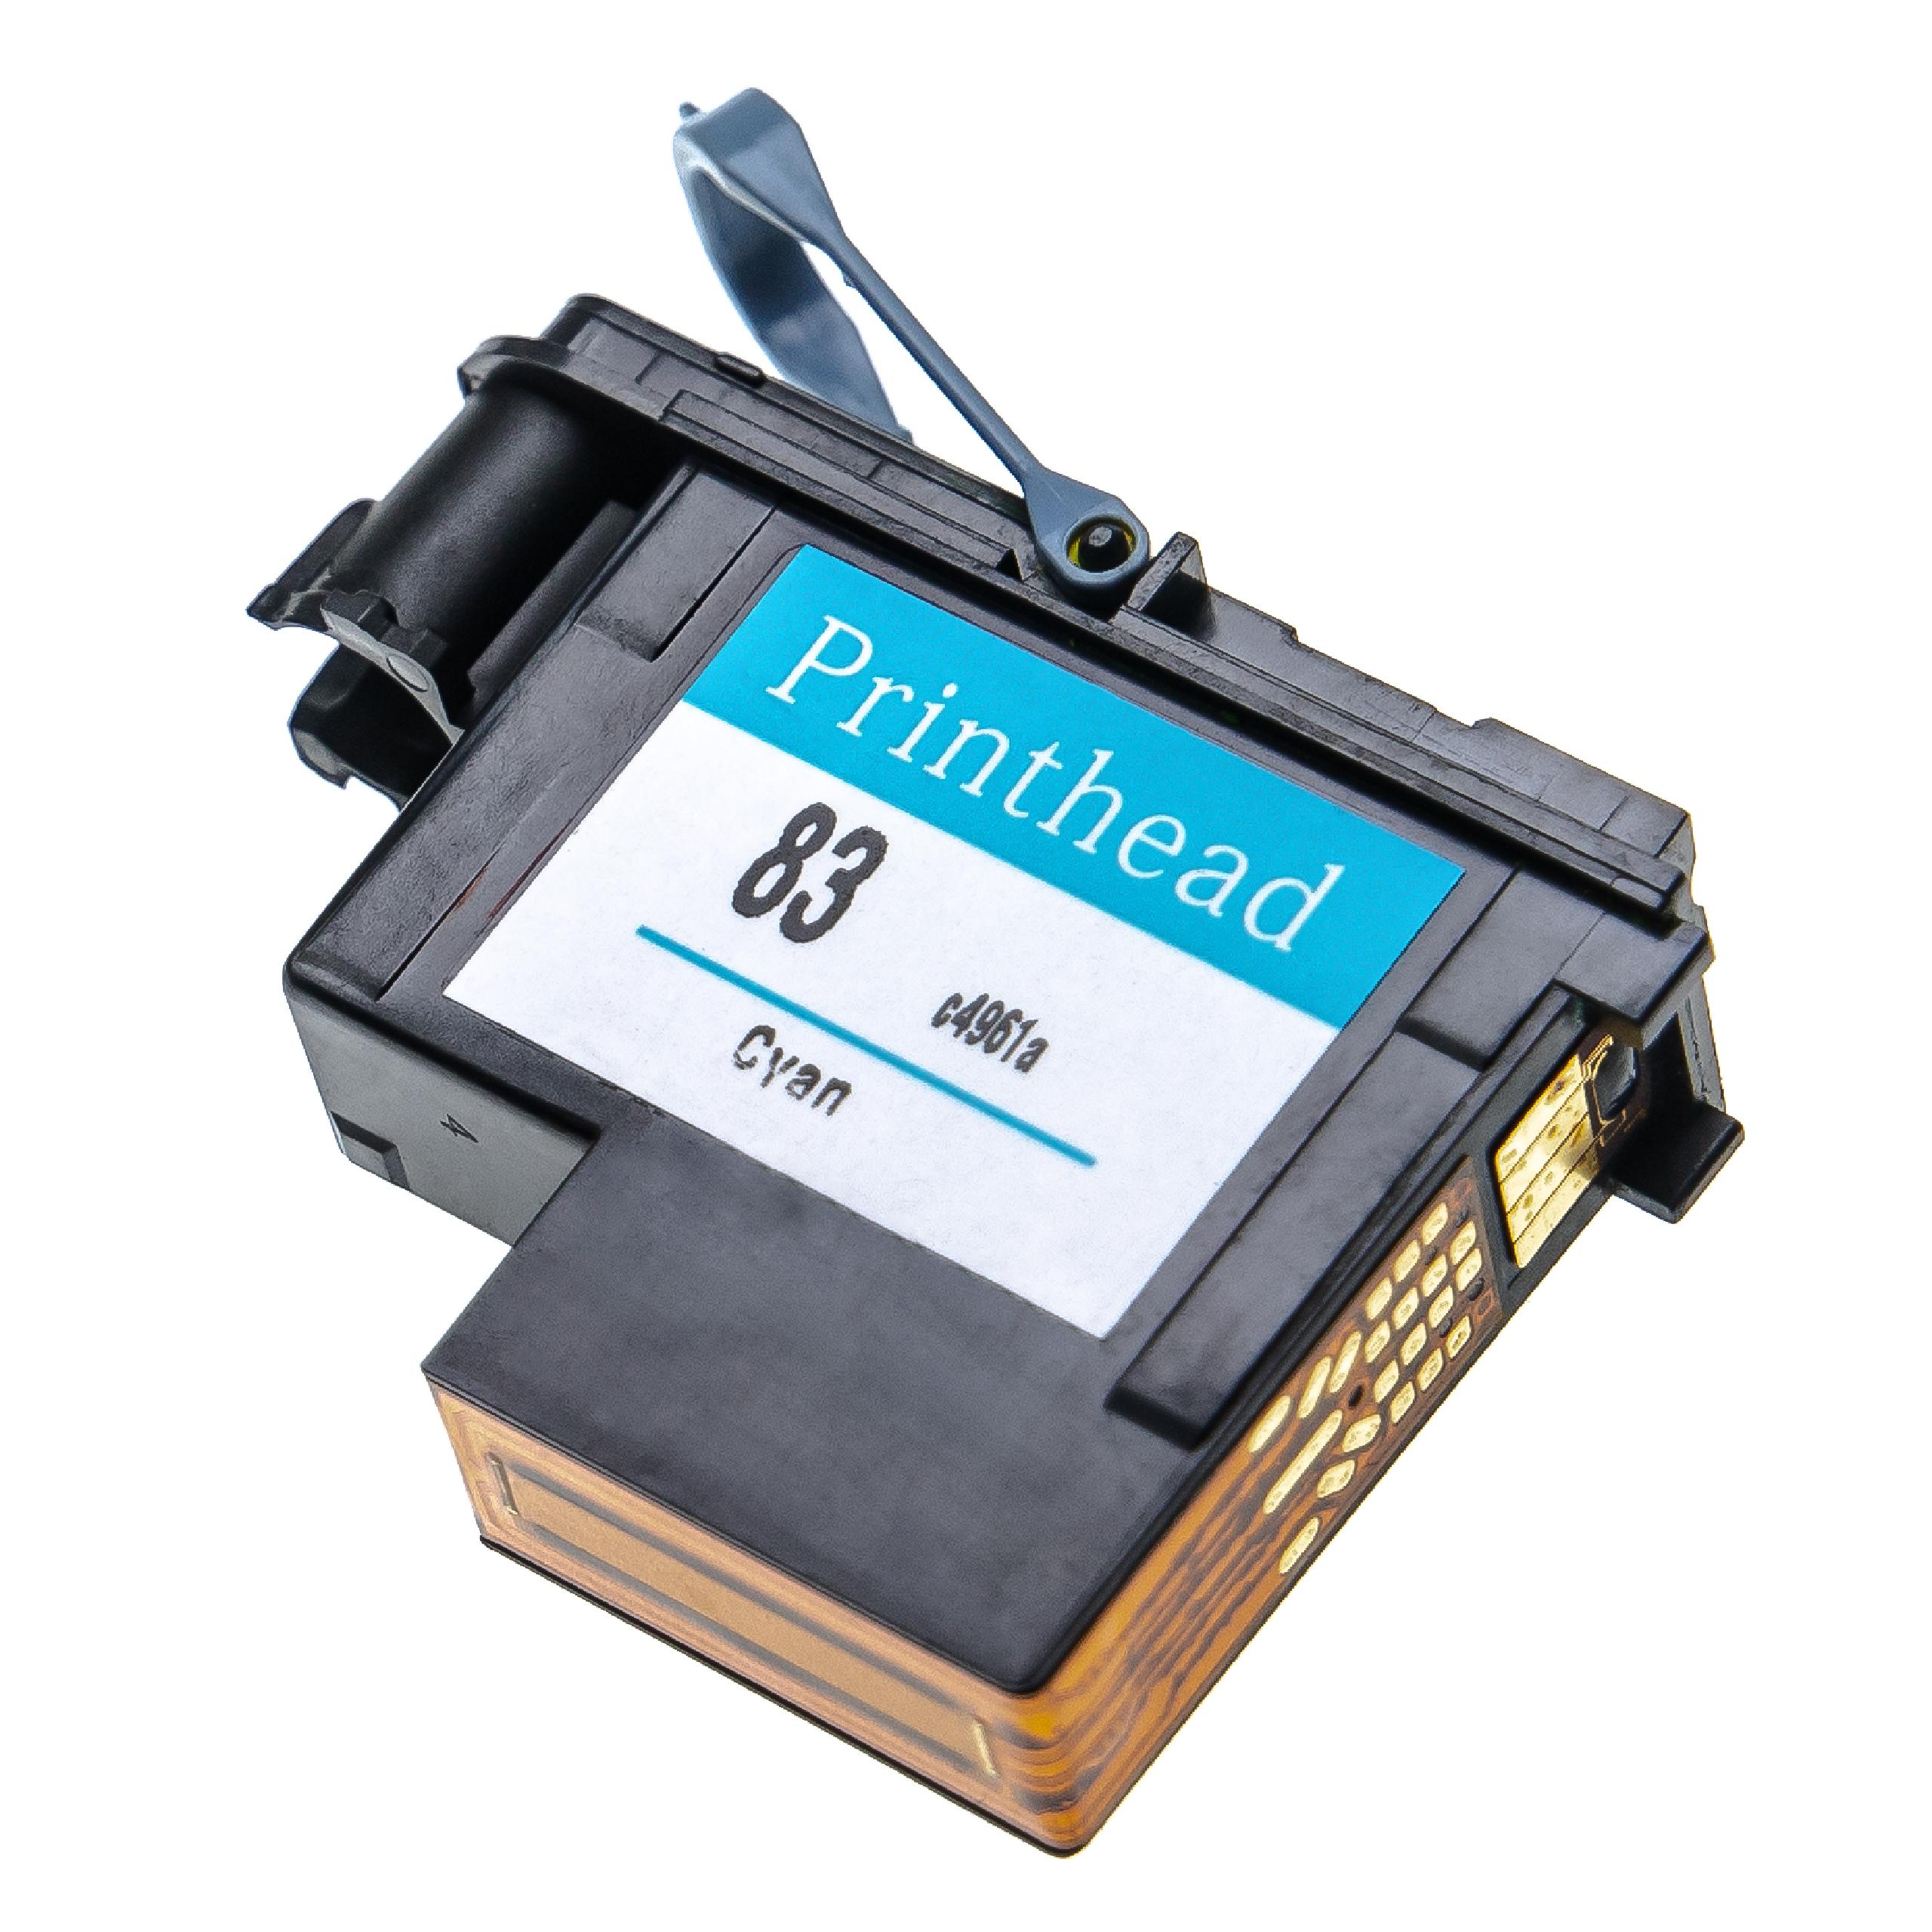 Printhead for HP DesignJet HP C4961A Printer - 13 ml, cyan, 6 cm wide, Refurbished, With Cleaner